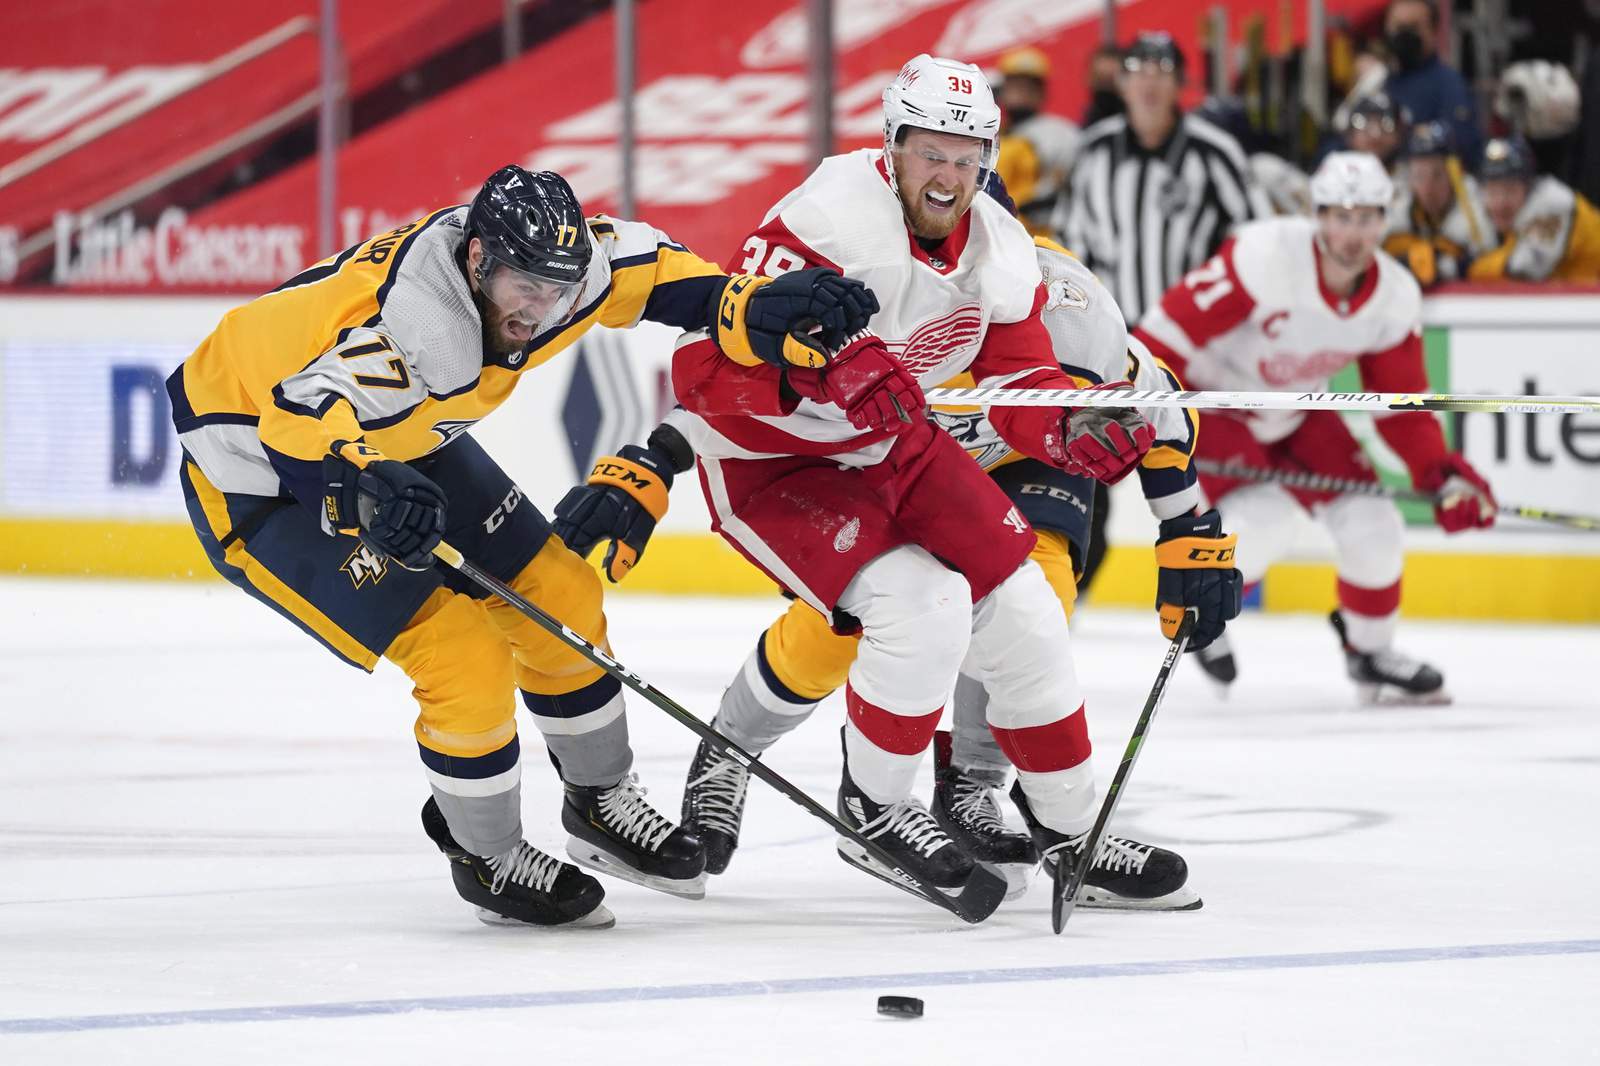 No cap crunch for Capitals, who land Mantha at deadline